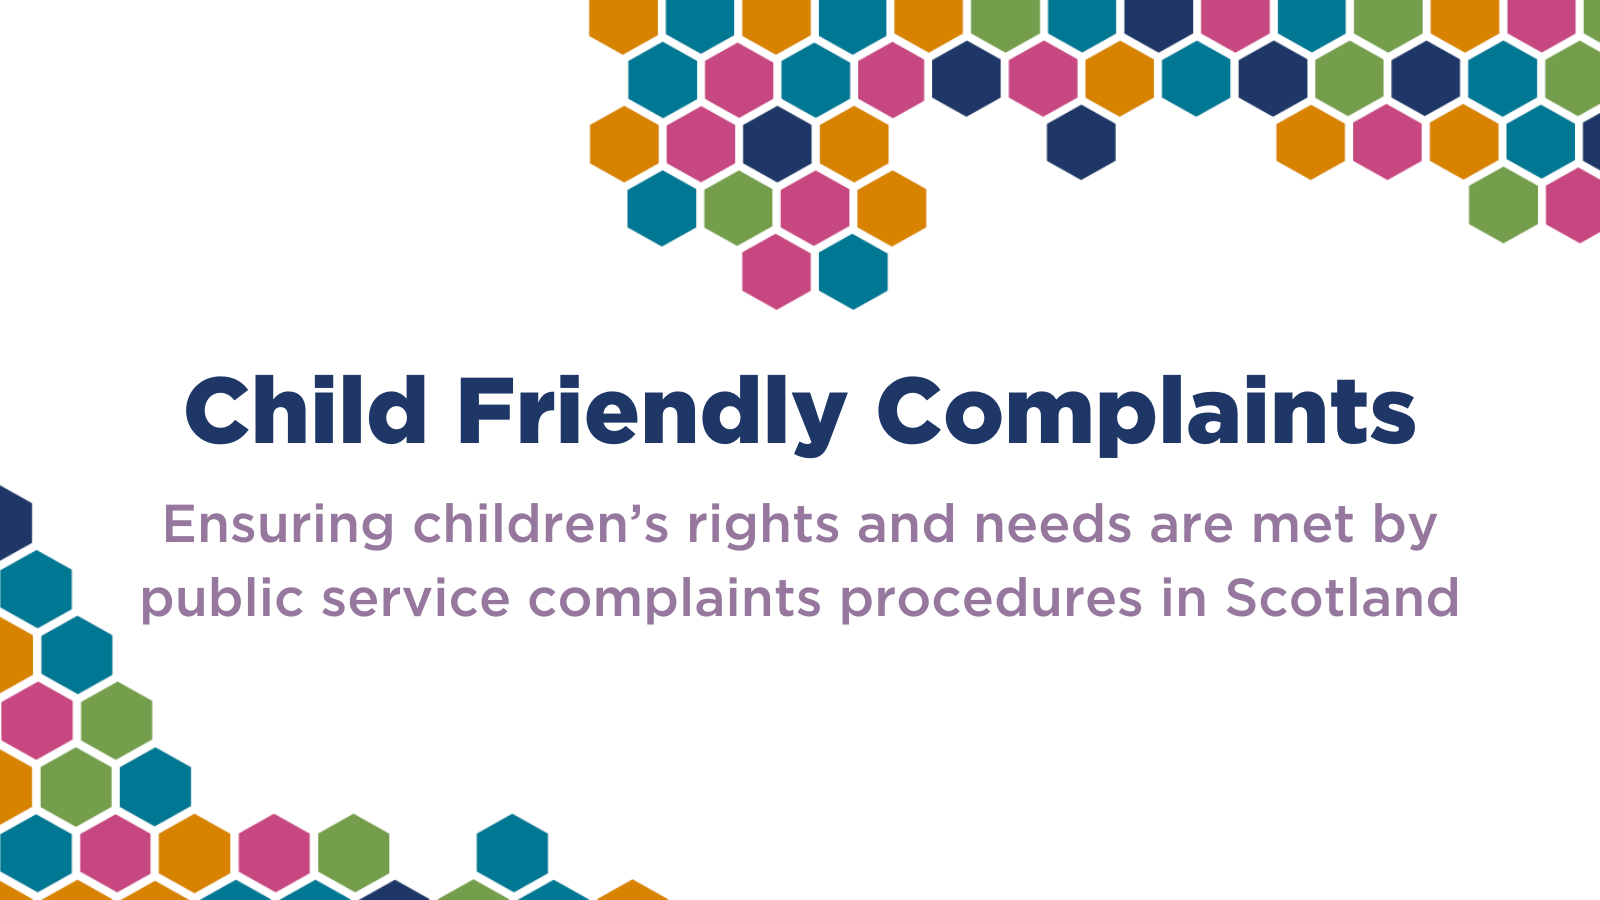 The text "Child friendly complaints, Ensuring children’s rights and needs are met by public service complaints procedures in Scotland" surrounded by a honeycomb pattern